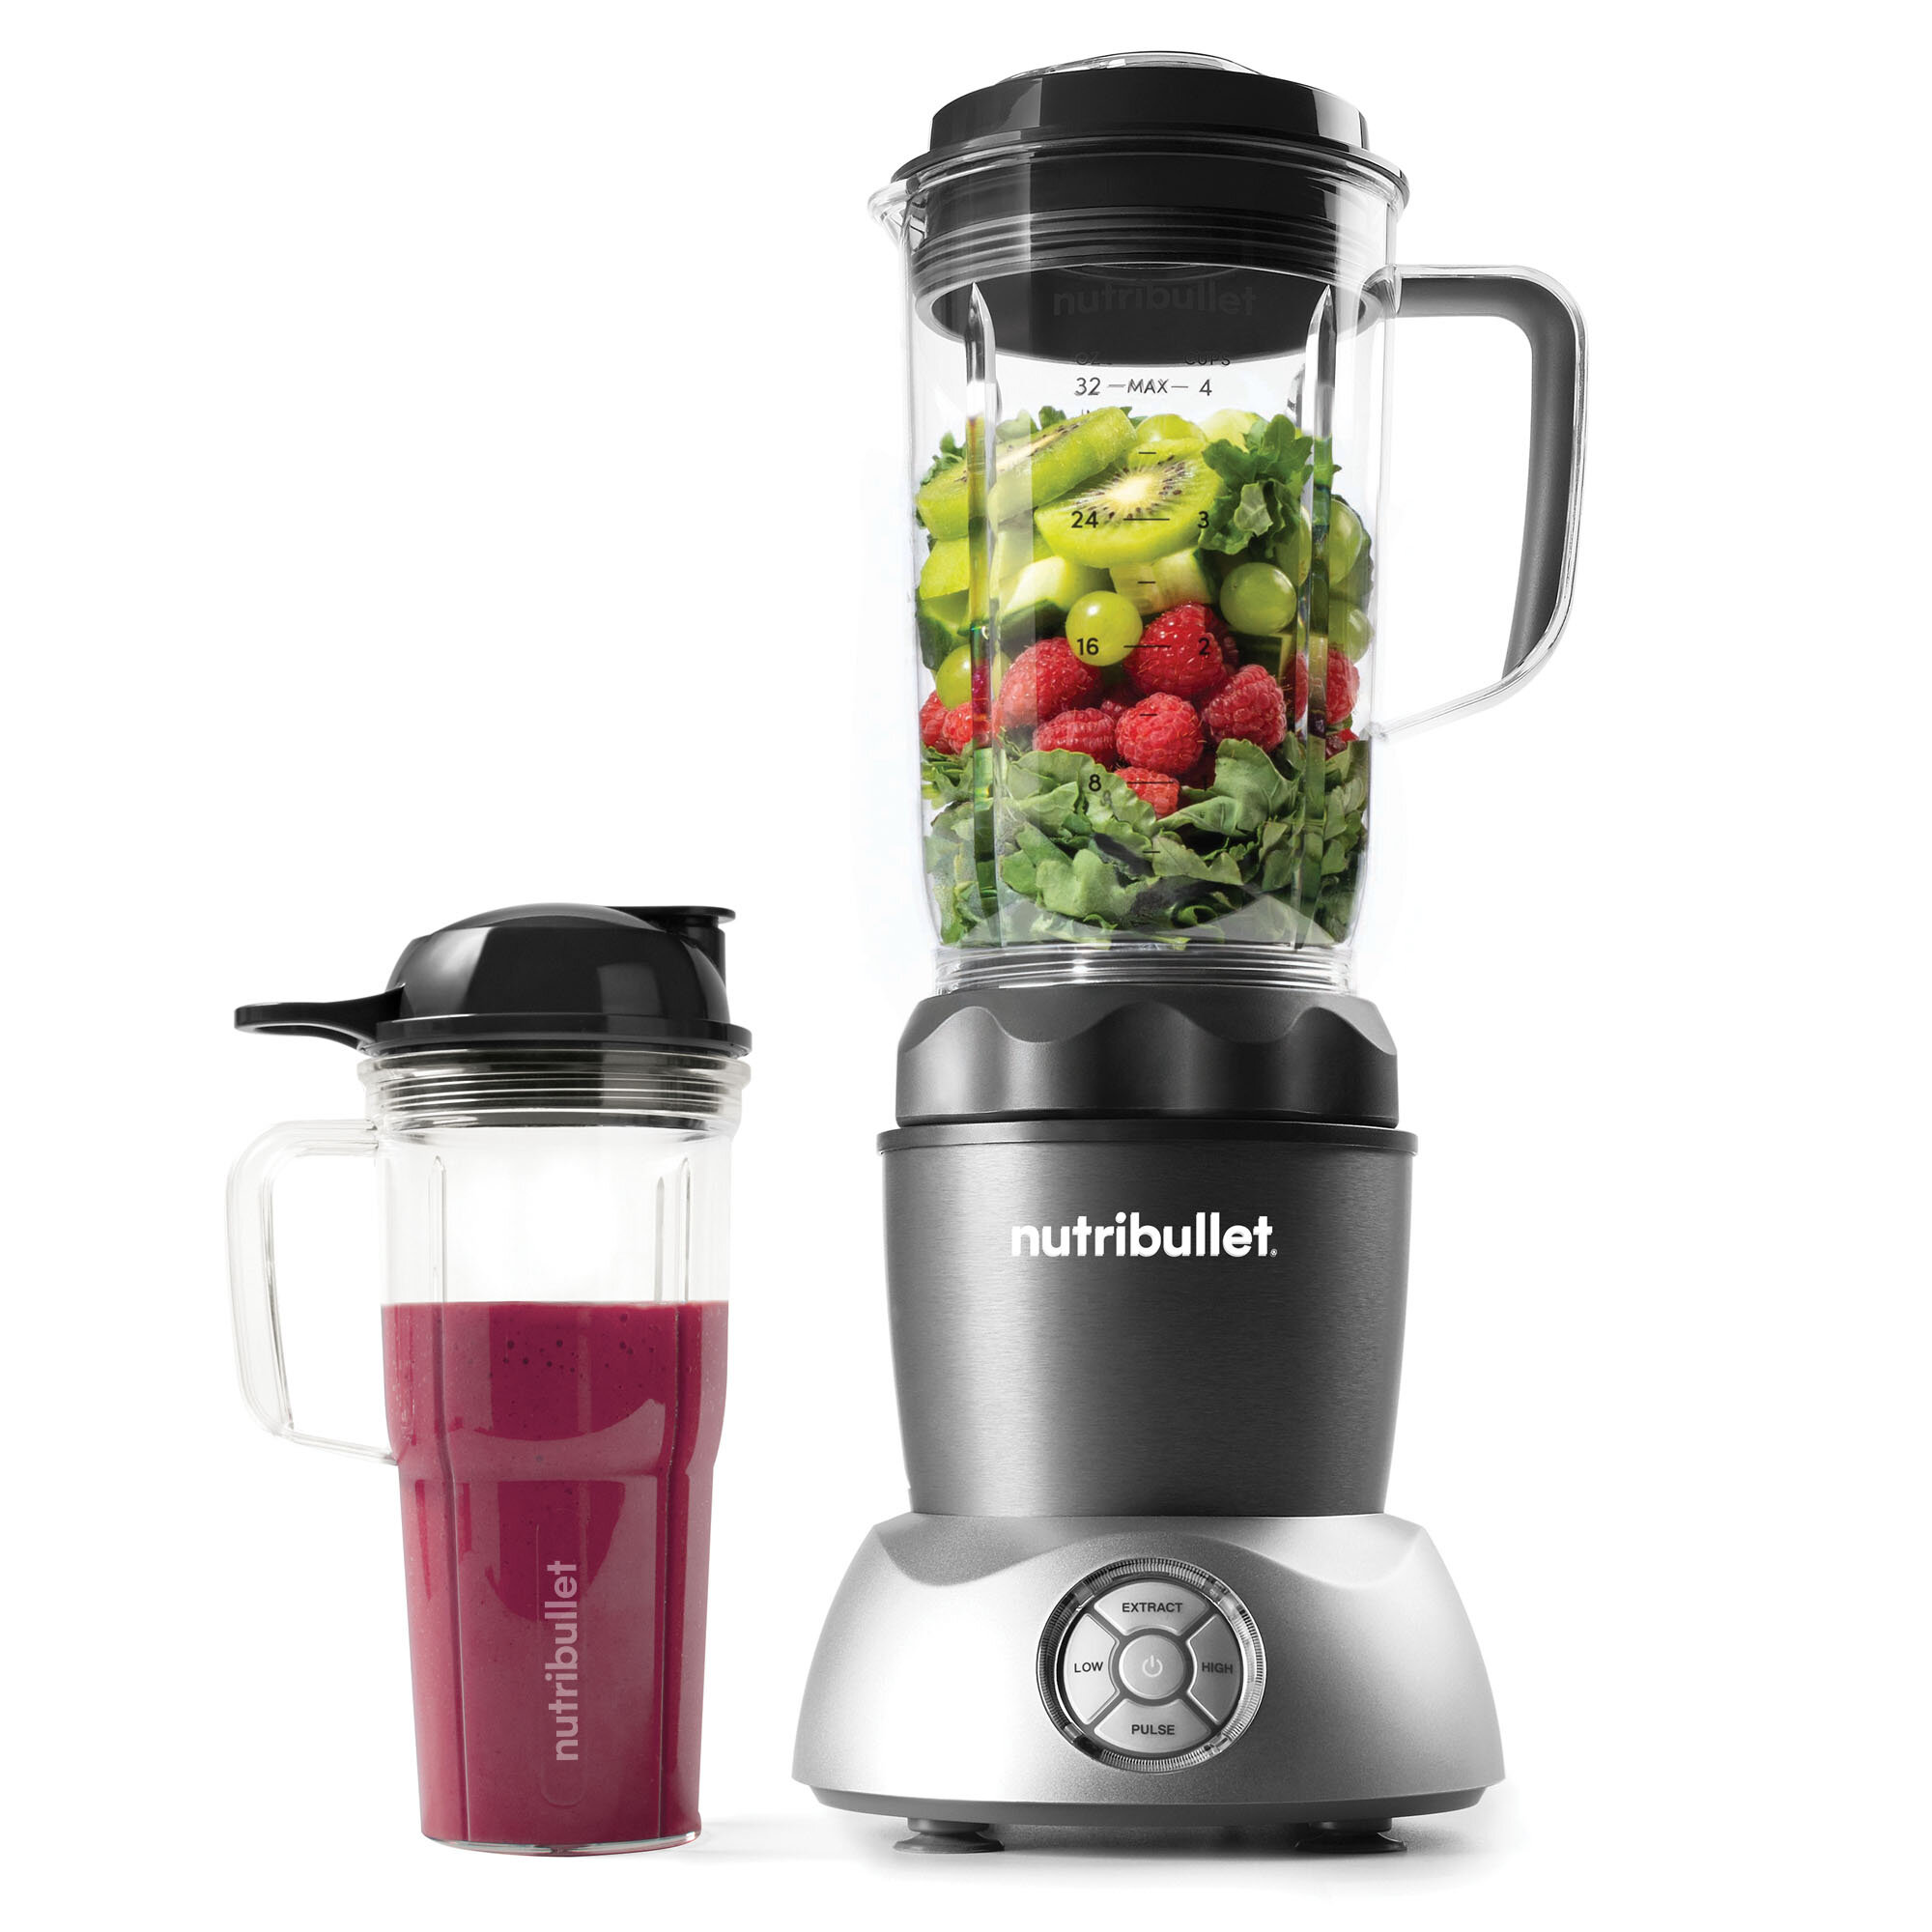 NutriBullet 8-Piece Magic Bullet Superfood Nutrition Extractor